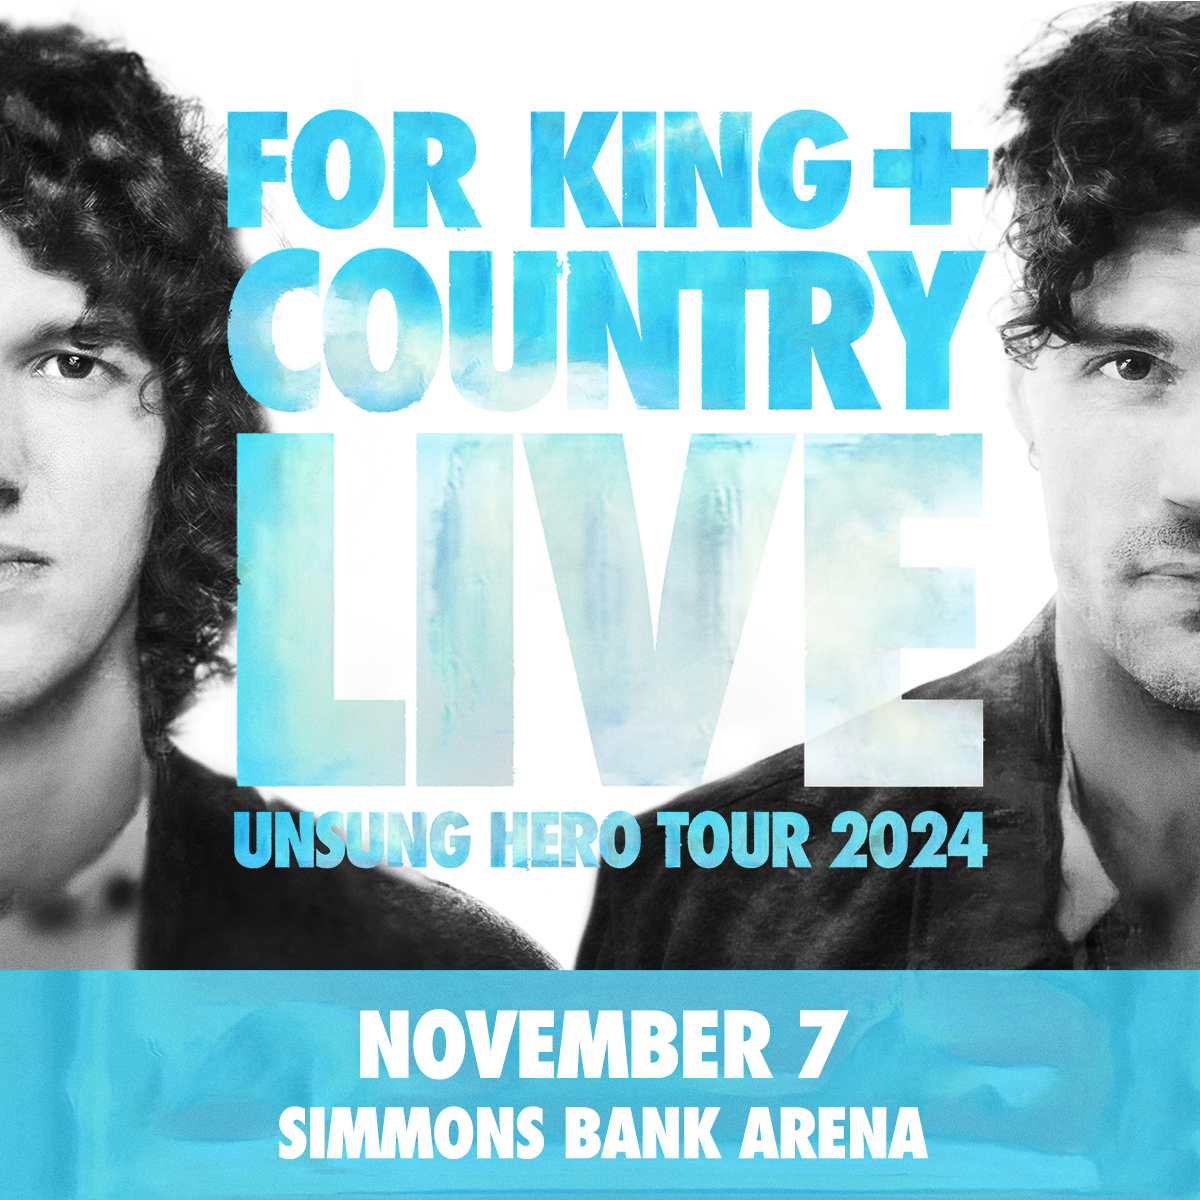 🎉 ON SALE NOW! 🎉 🎶💙 @4kingandcountry is one of the music industry’s most respected and decorated duos and they are coming to Simmons Bank Arena on Nov 7! Brothers Joel and Luke Smallbone's live show has been hailed as a must-see concert. 🎟️ bit.ly/3Uzo5ii